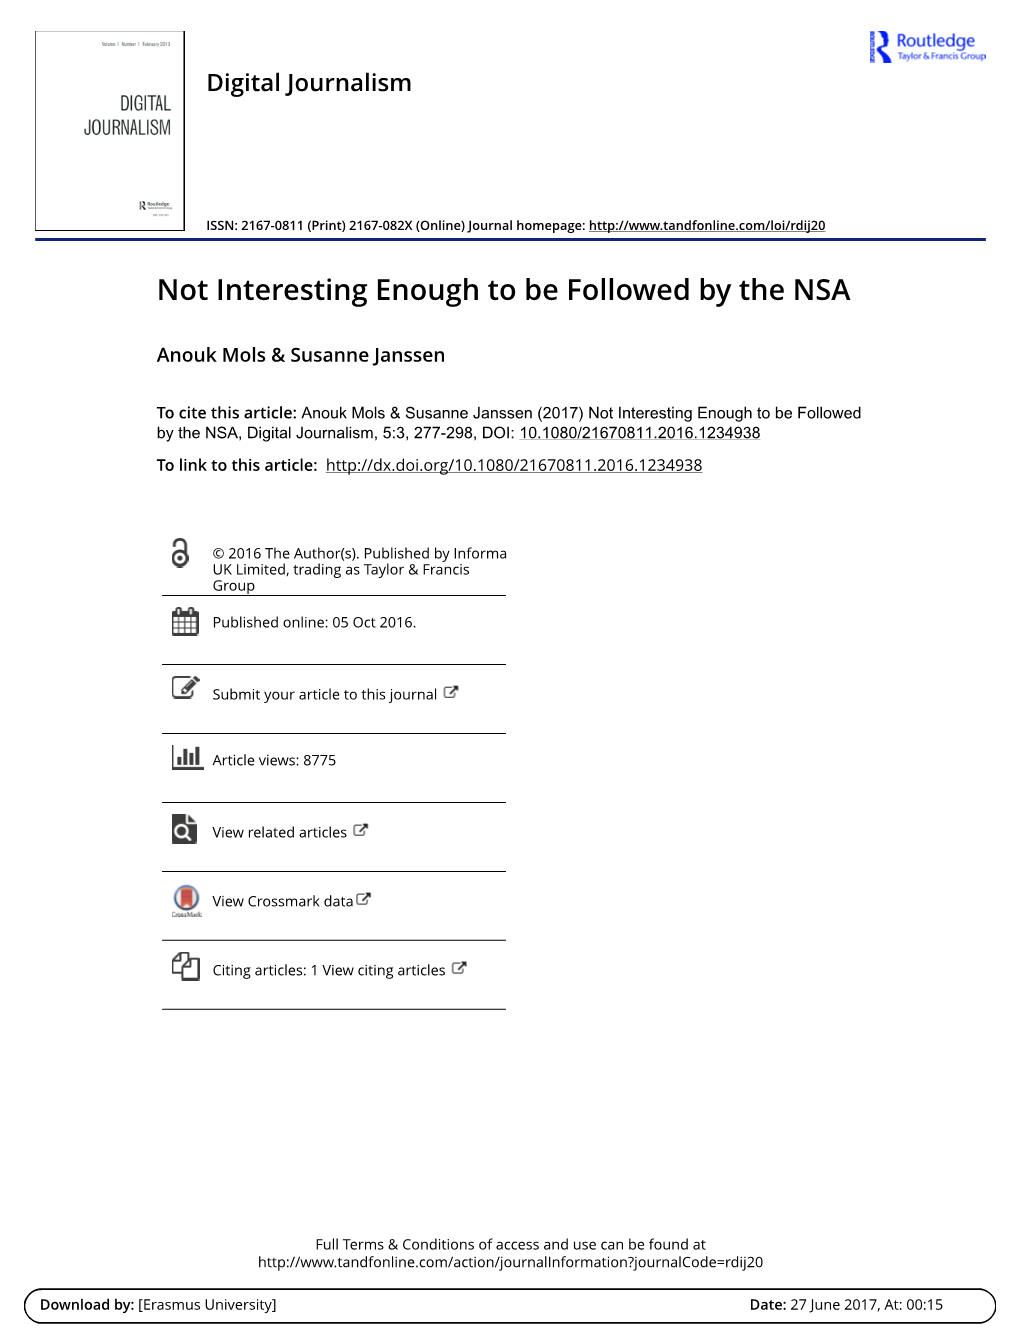 Not Interesting Enough to Be Followed by the NSA. an Analysis of Dutch Privacy Attitudes